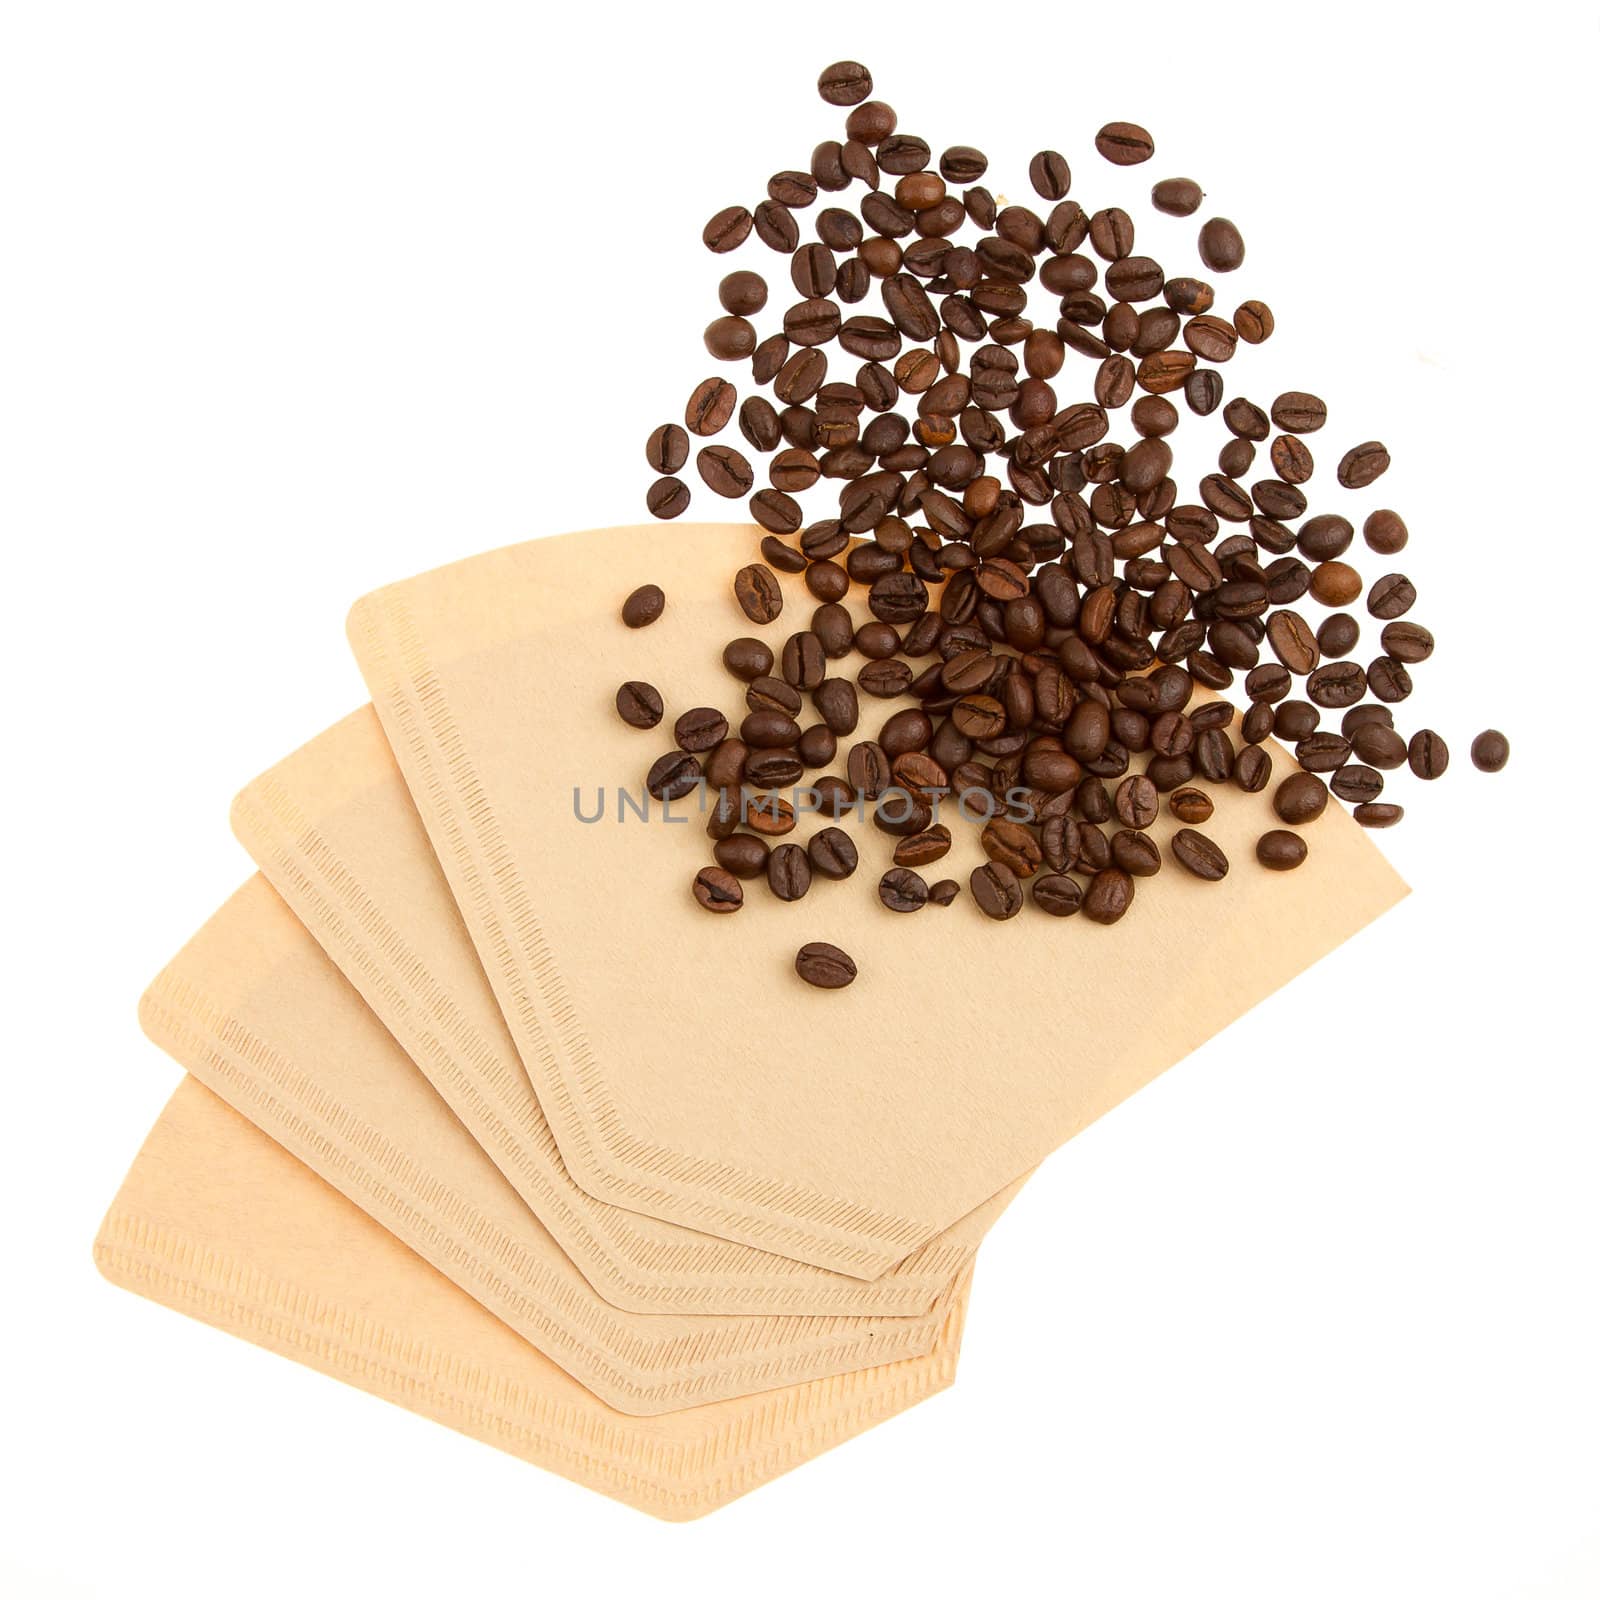 Coffee beans on a coffee filter (white background) by michaklootwijk